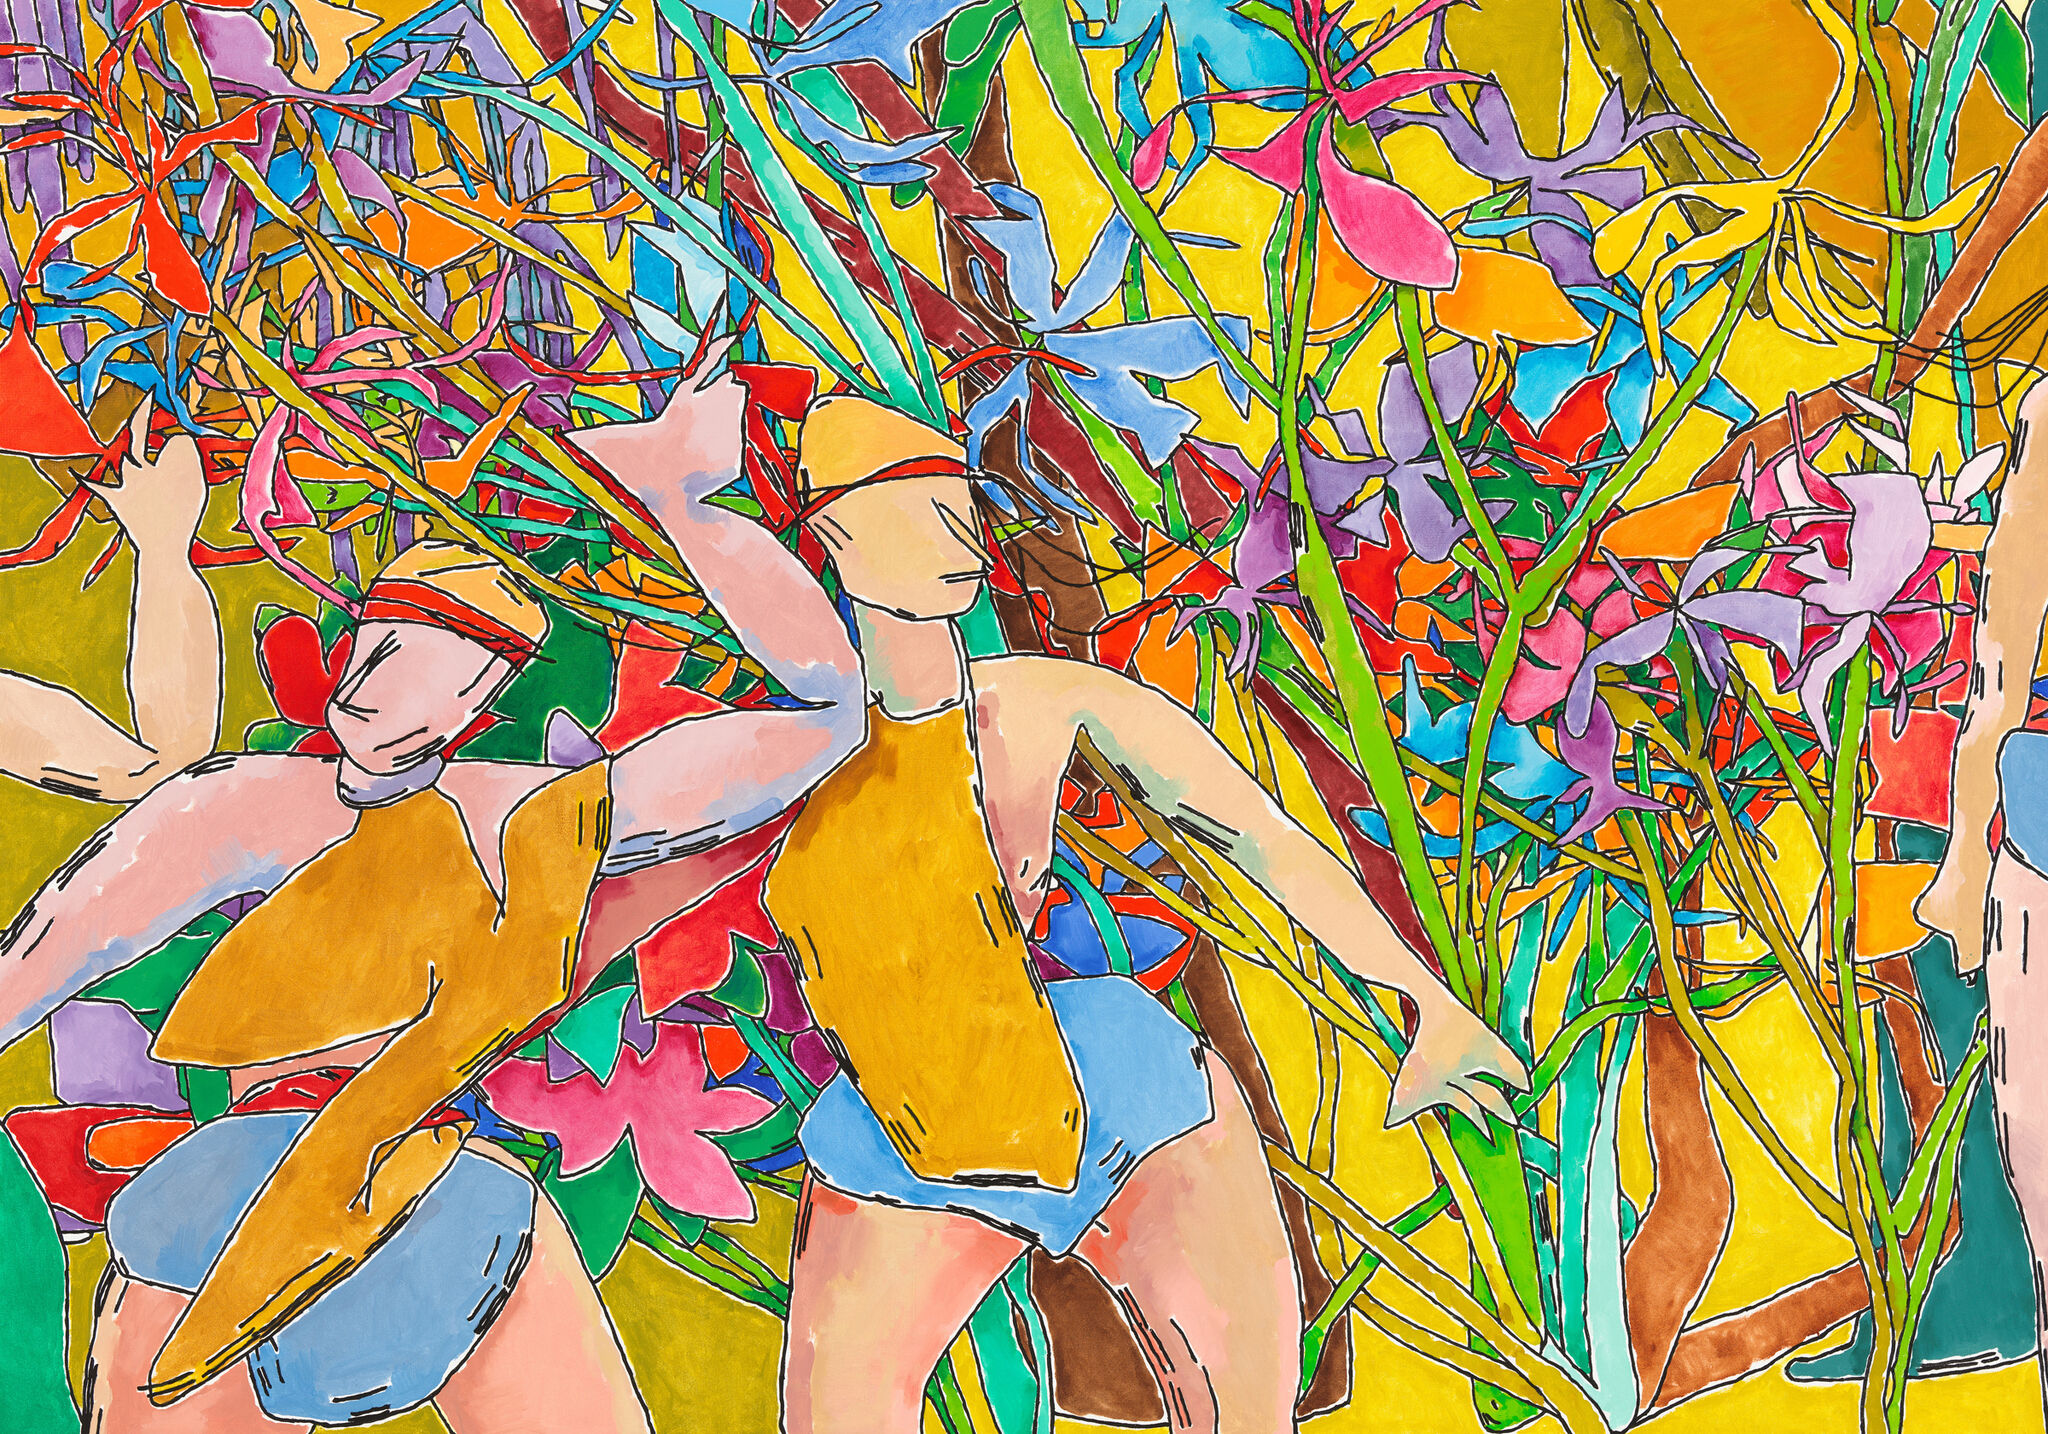 Colorful abstract painting of figures dancing amidst vibrant, intertwined plant-like shapes.